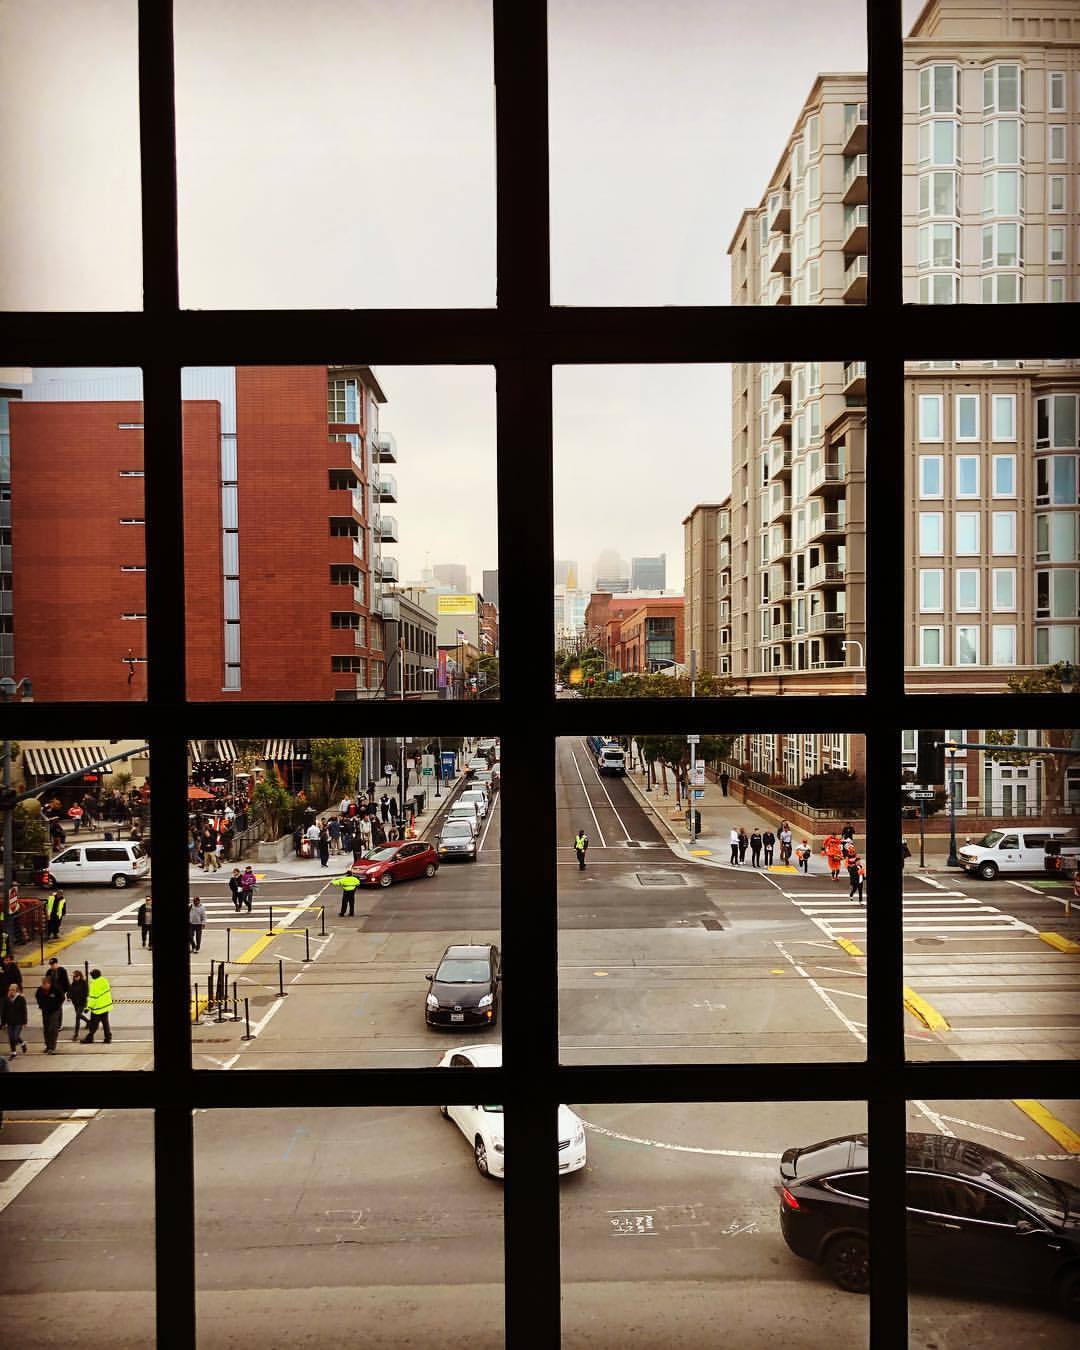 Windows and cityscapes. #sf  (at AT&amp;T Park)